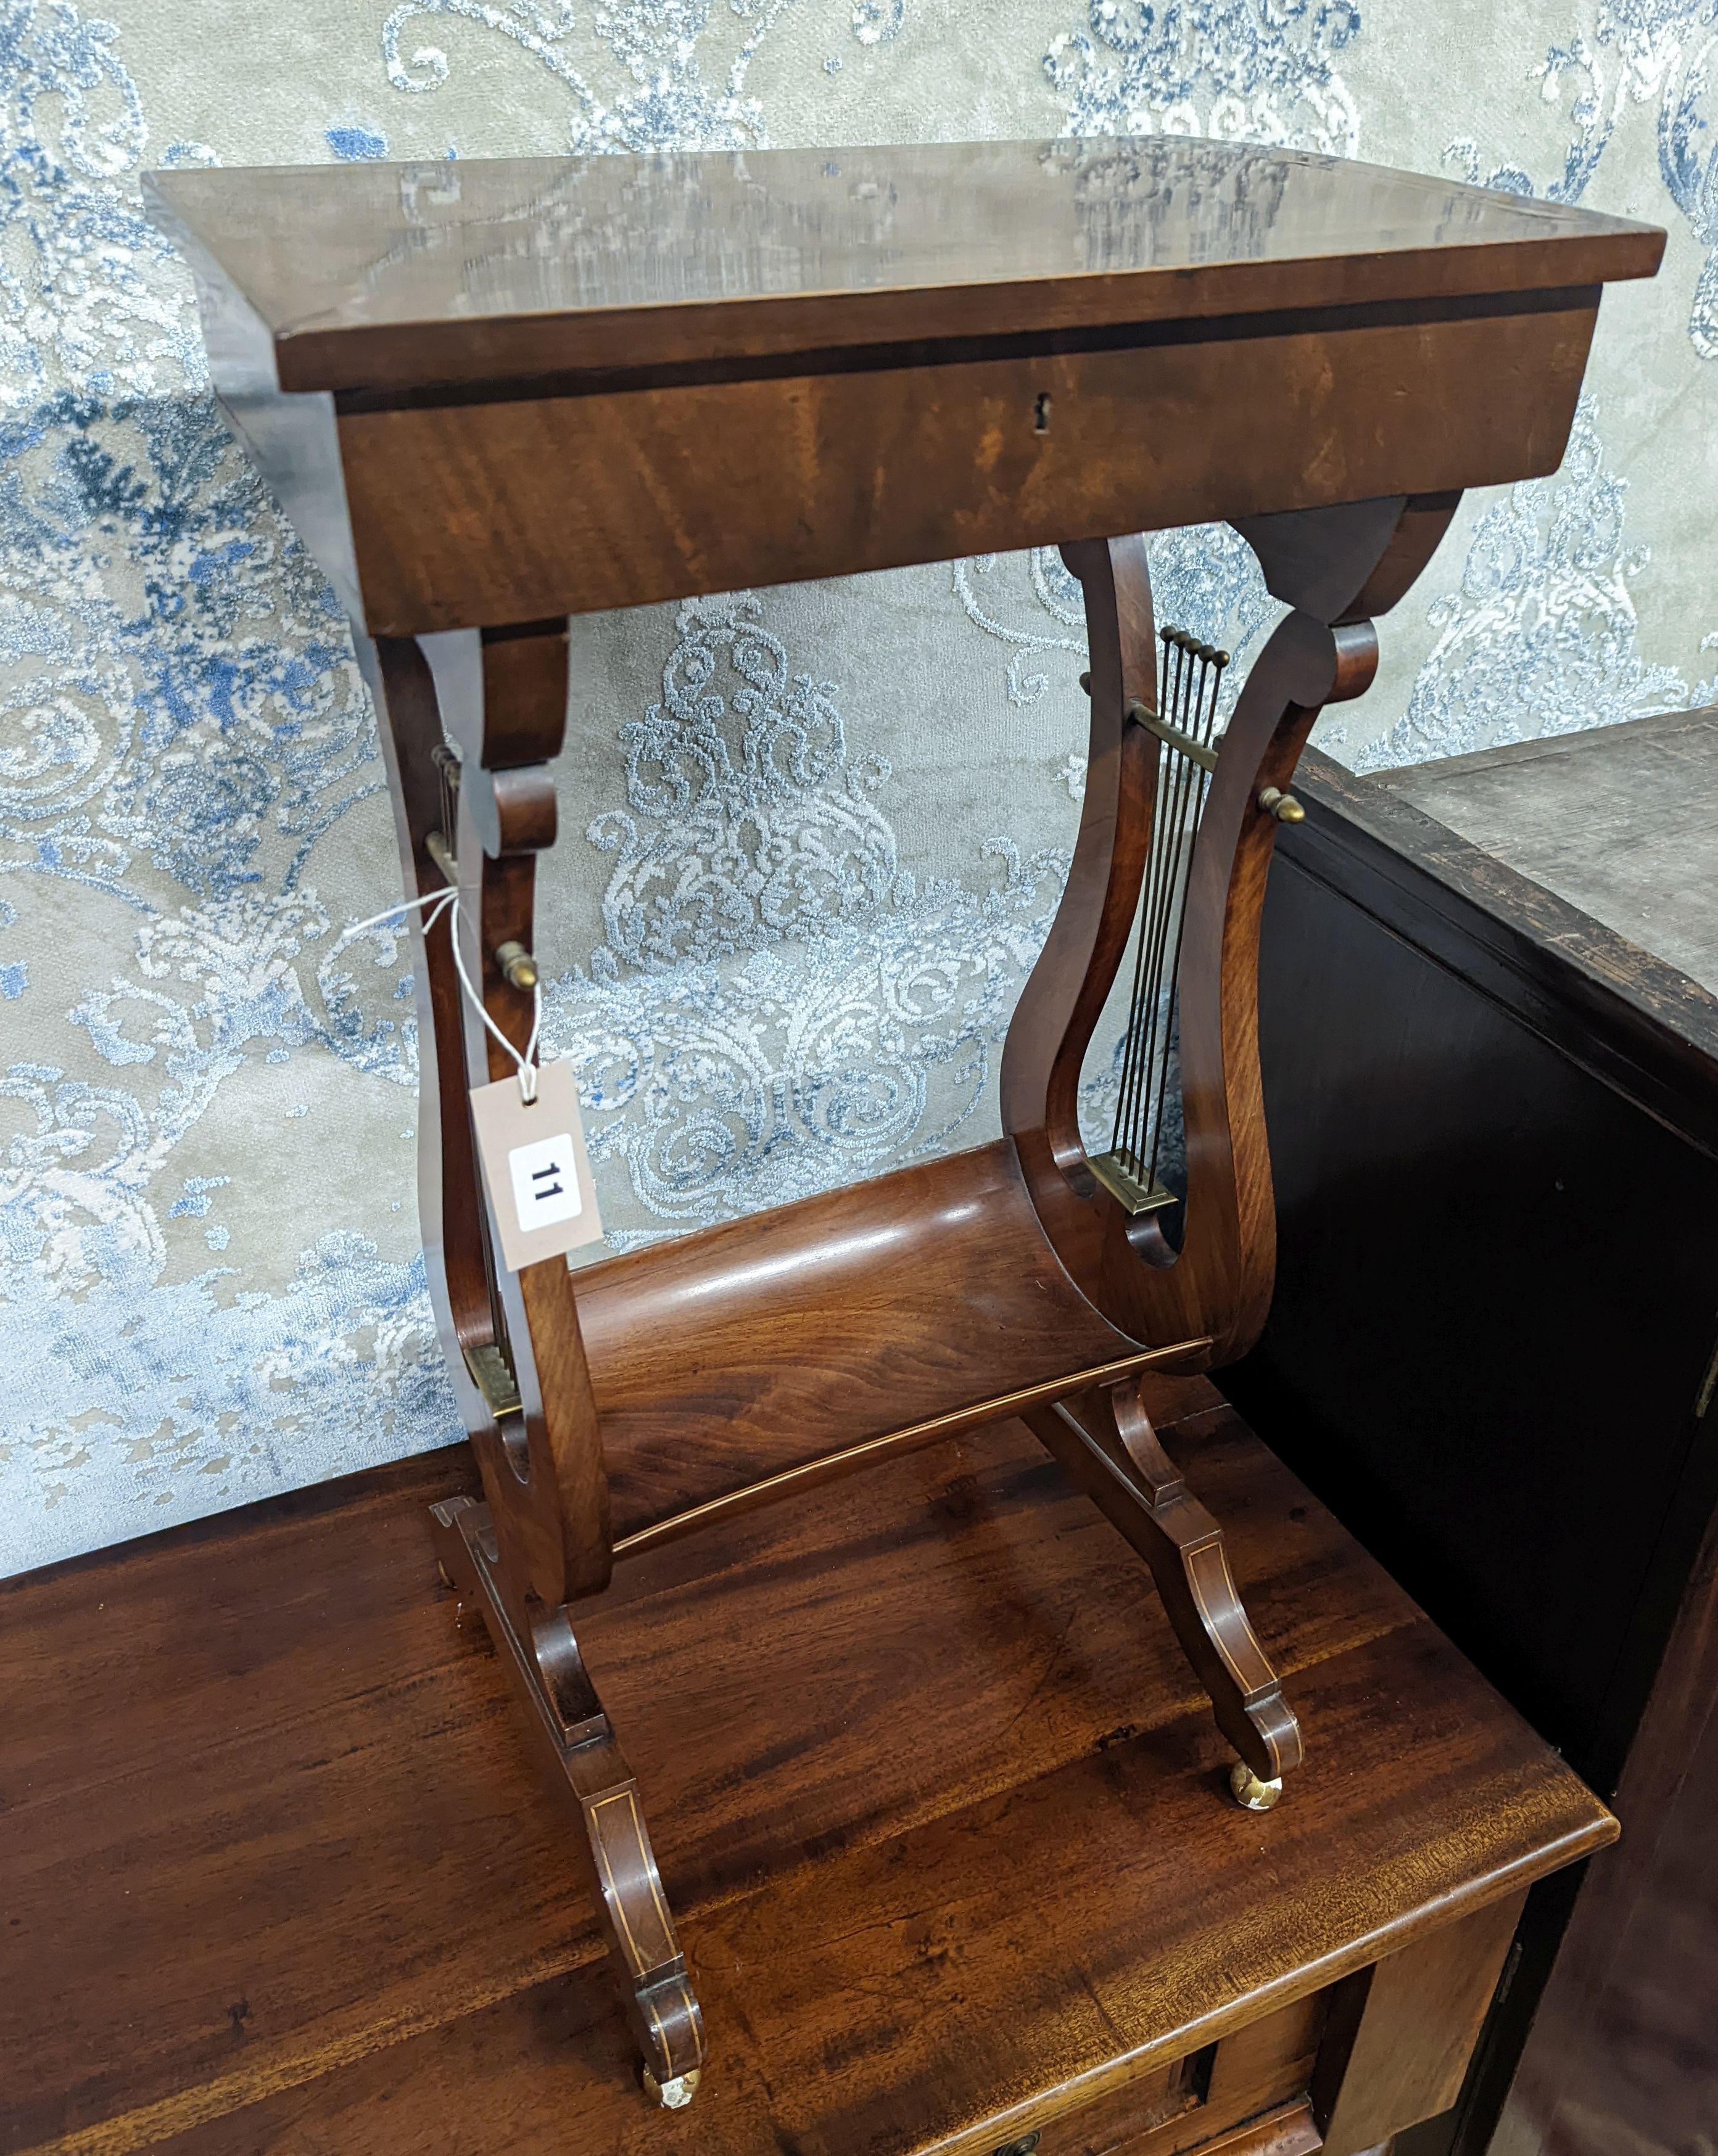 A reproduction Regency style mahogany work table on lyre supports, width 39cm, depth 27cm, height